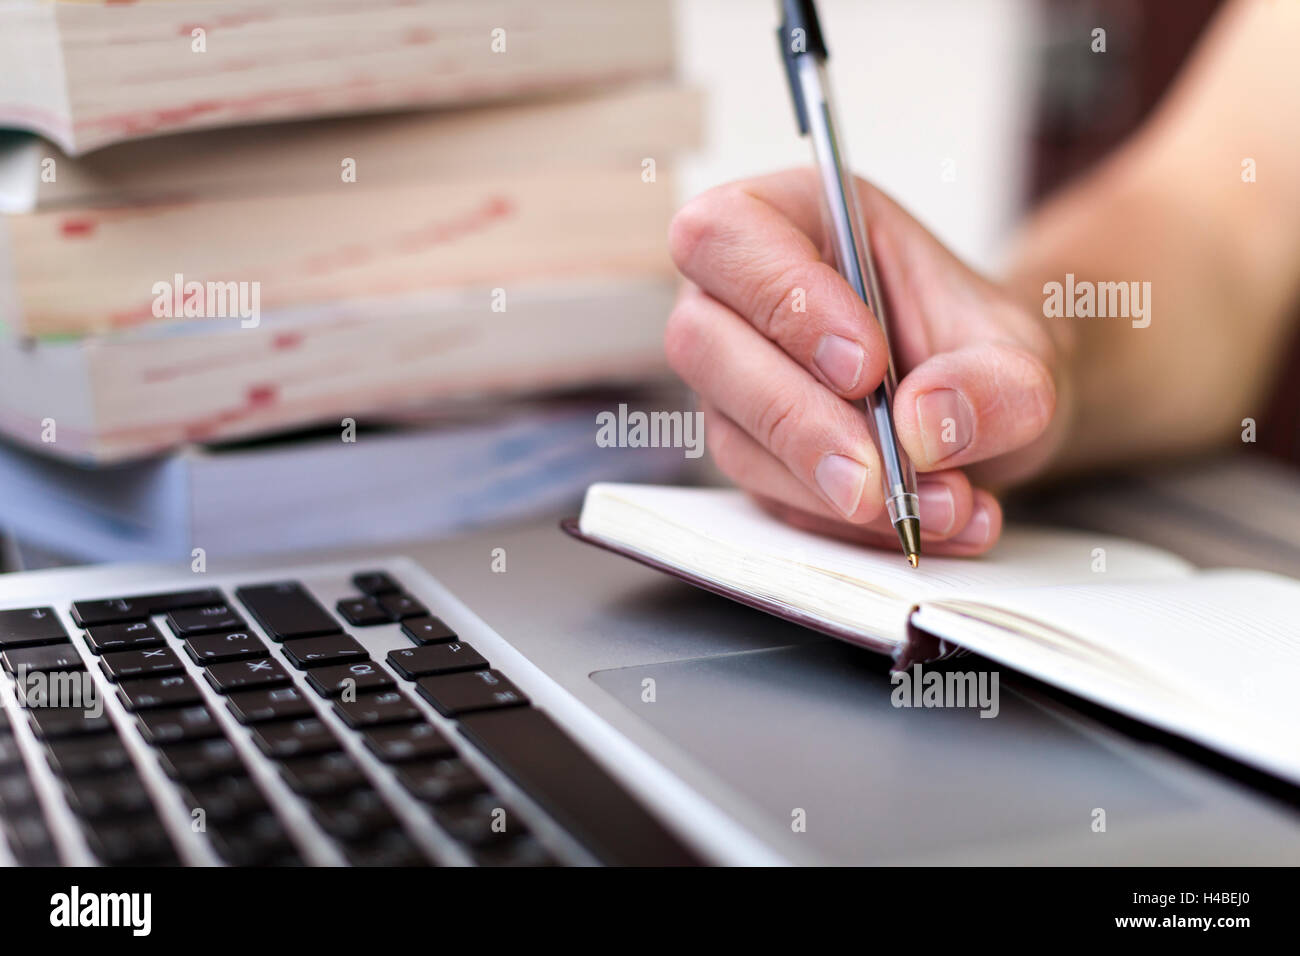 Young traveler writing down journey stories in a notebook with a laptop and books in the background Stock Photo